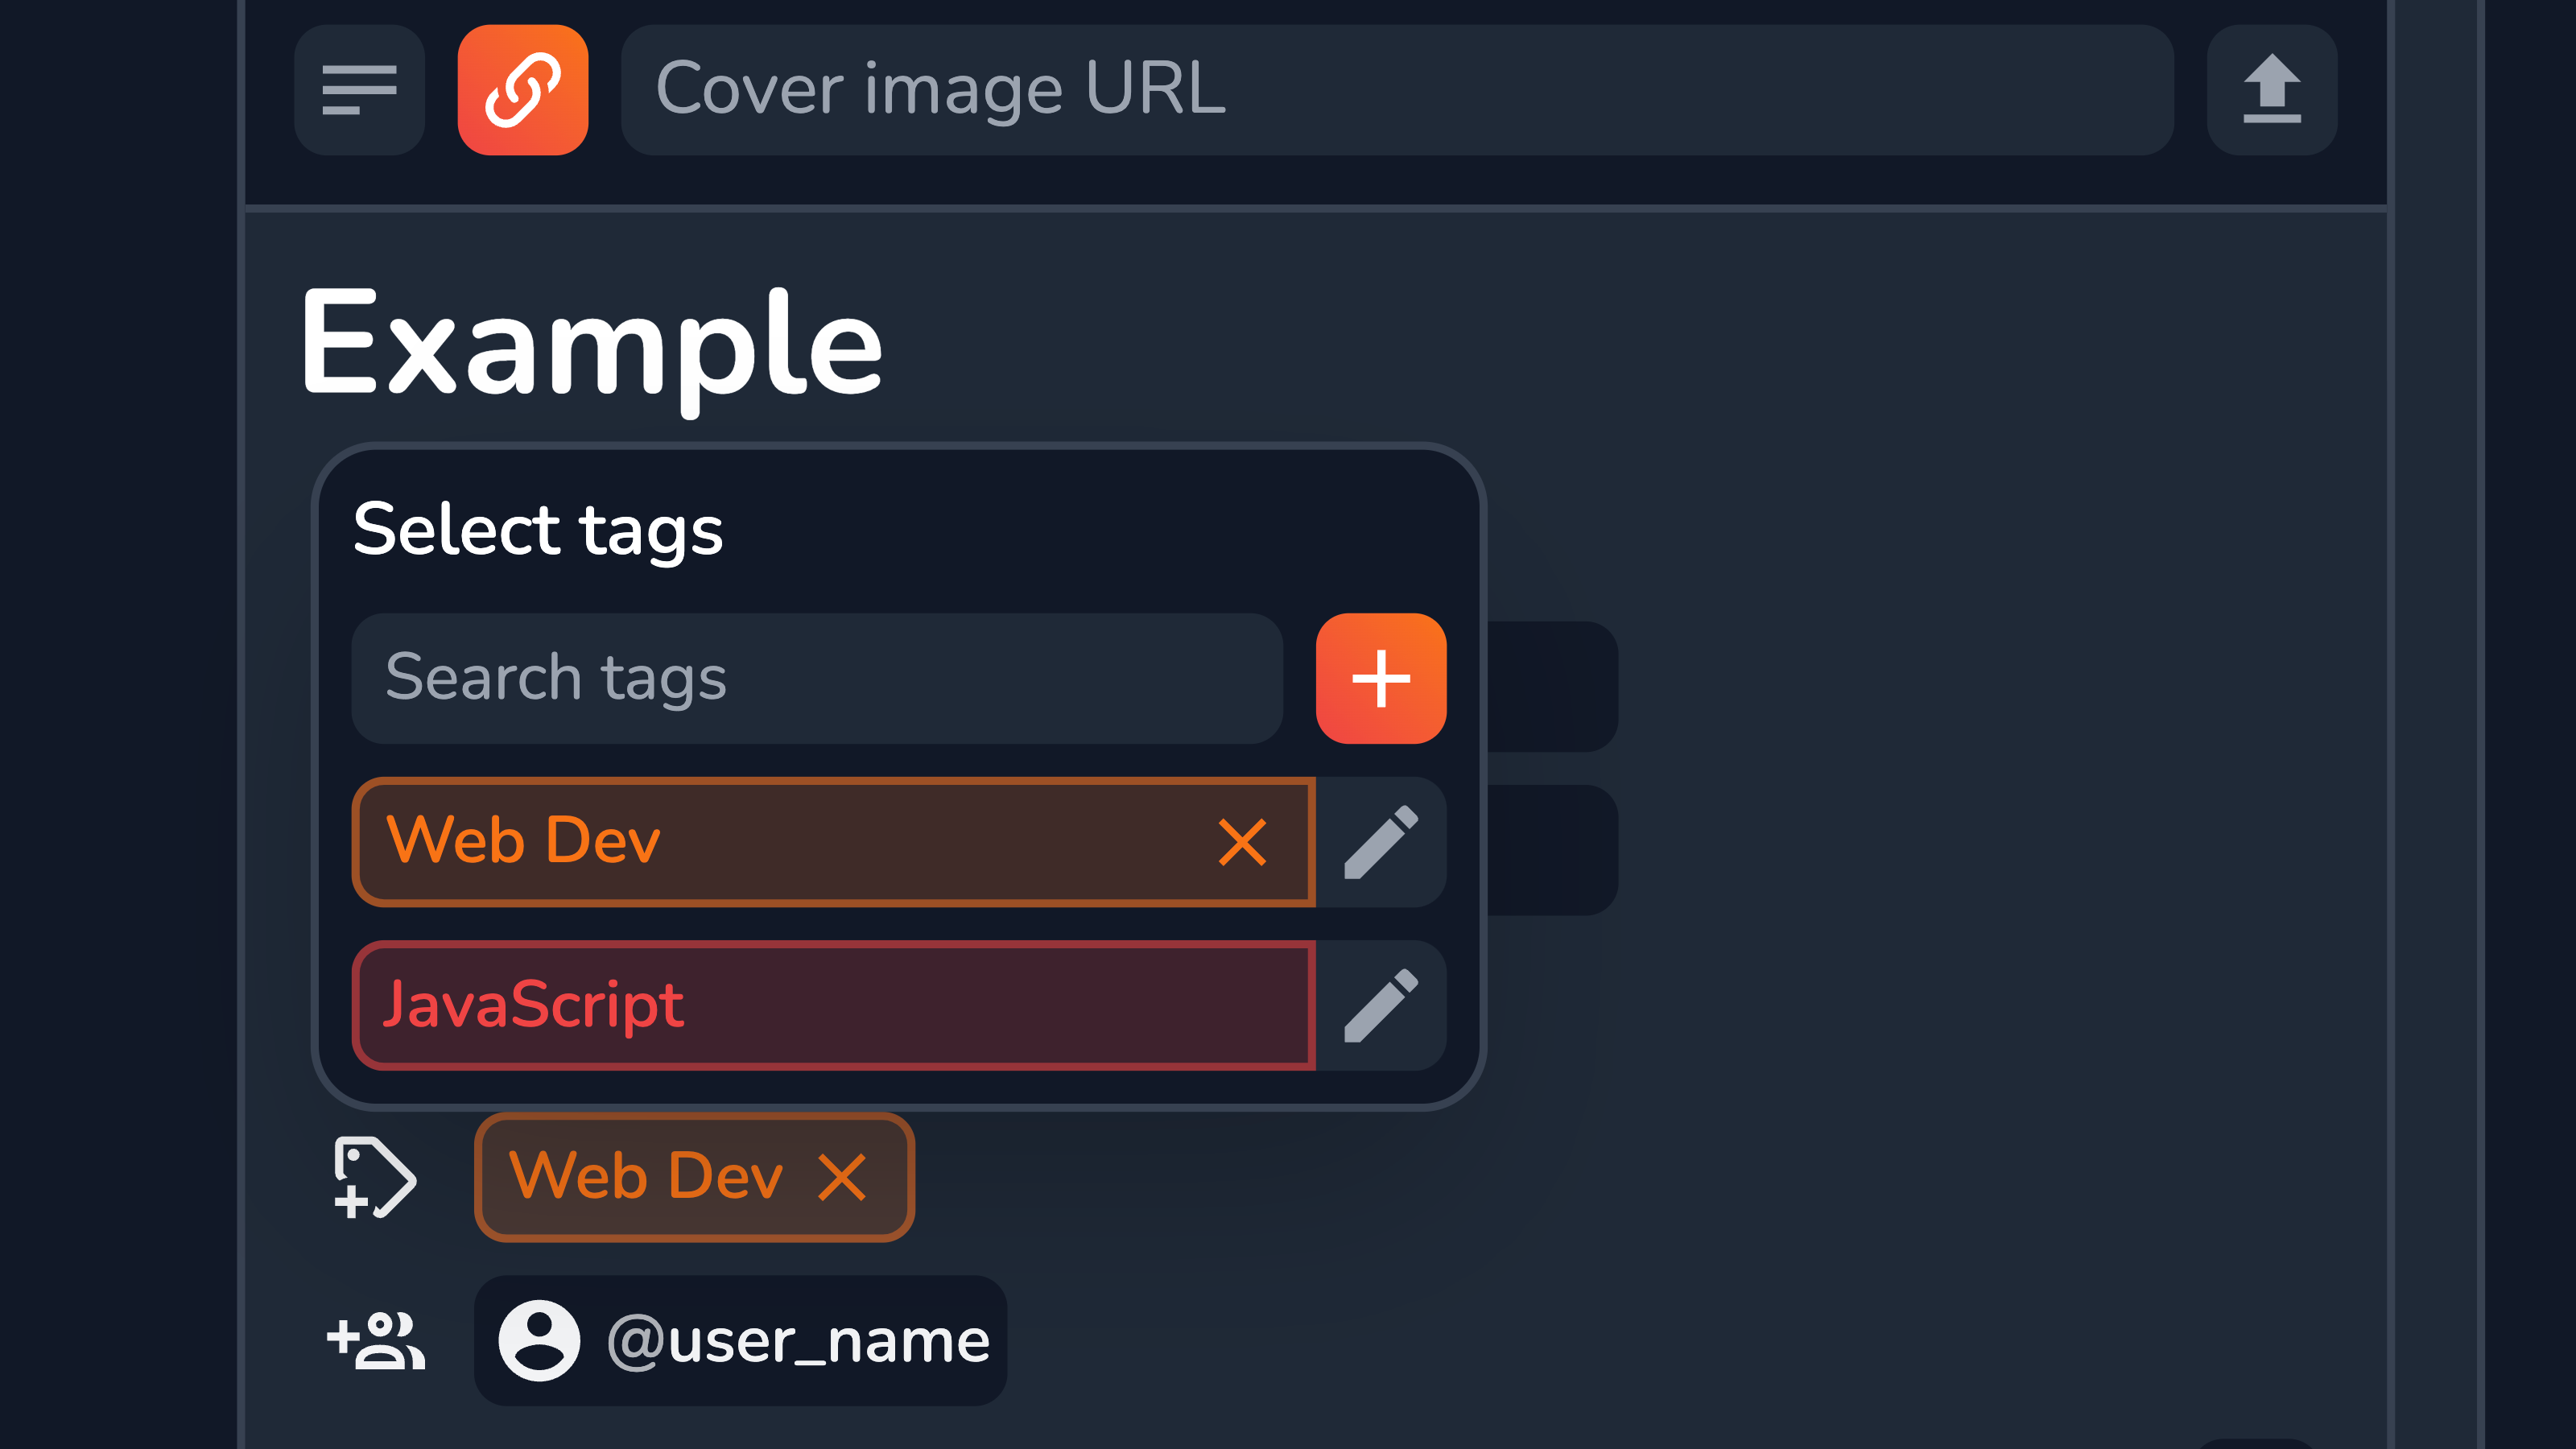 Creating tags in Vrite